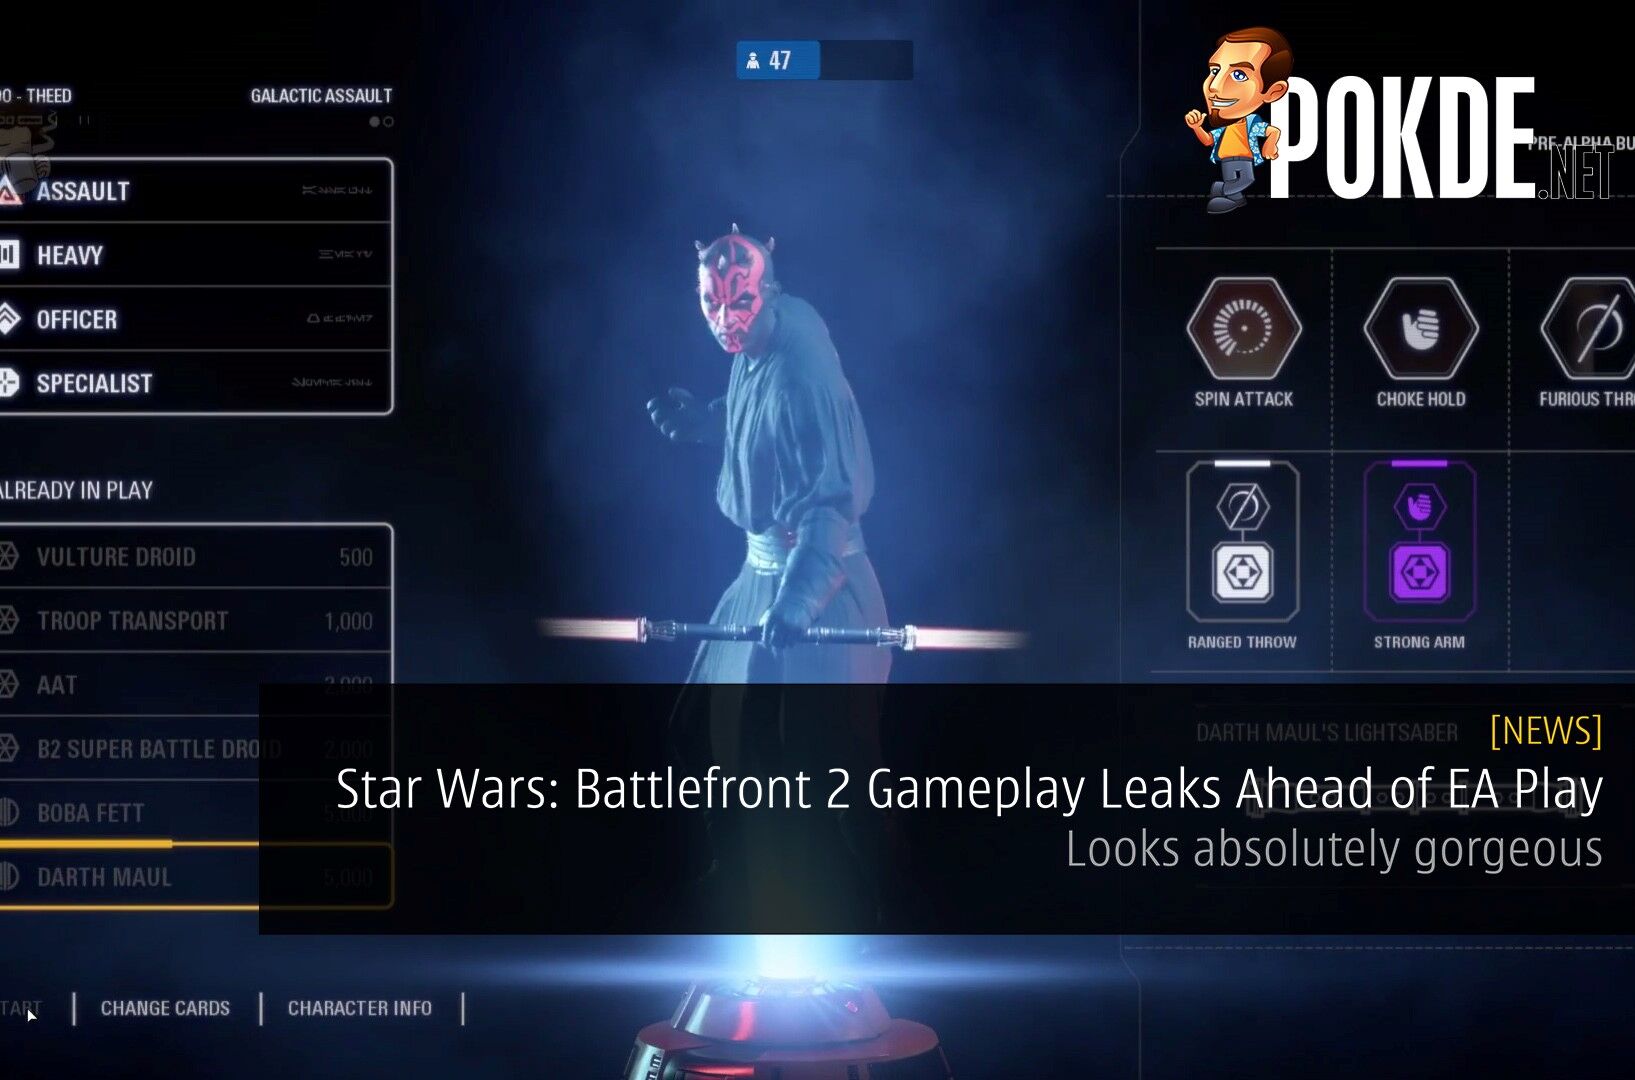 Star Wars: Battlefront 2 Gameplay Leaks Ahead of EA Play - Looks absolutely gorgeous 23